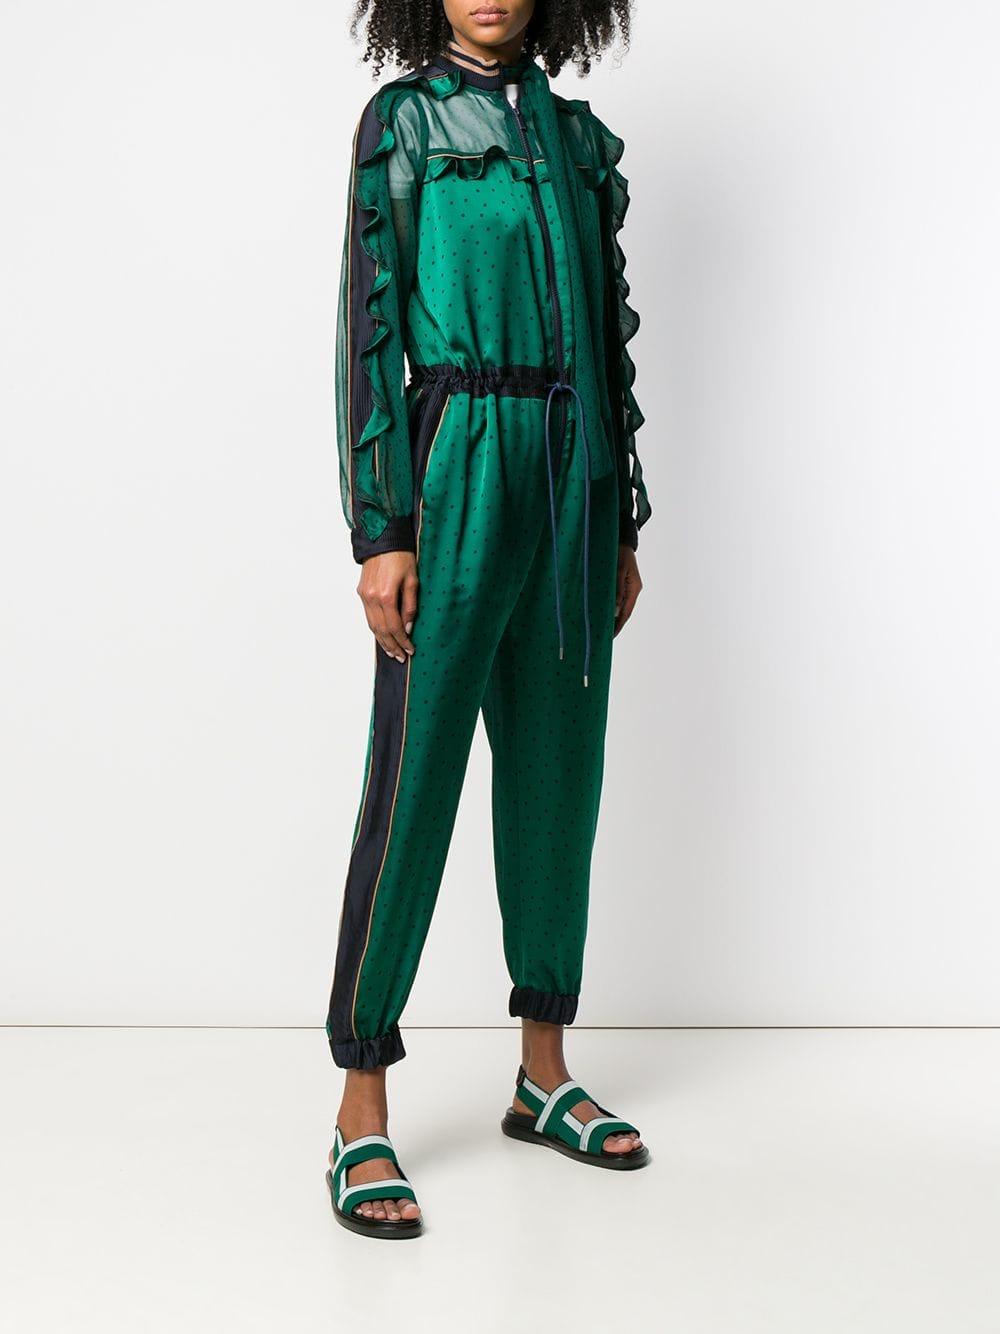 Sacai Synthetic Dot Print Jumpsuit in Green - Lyst